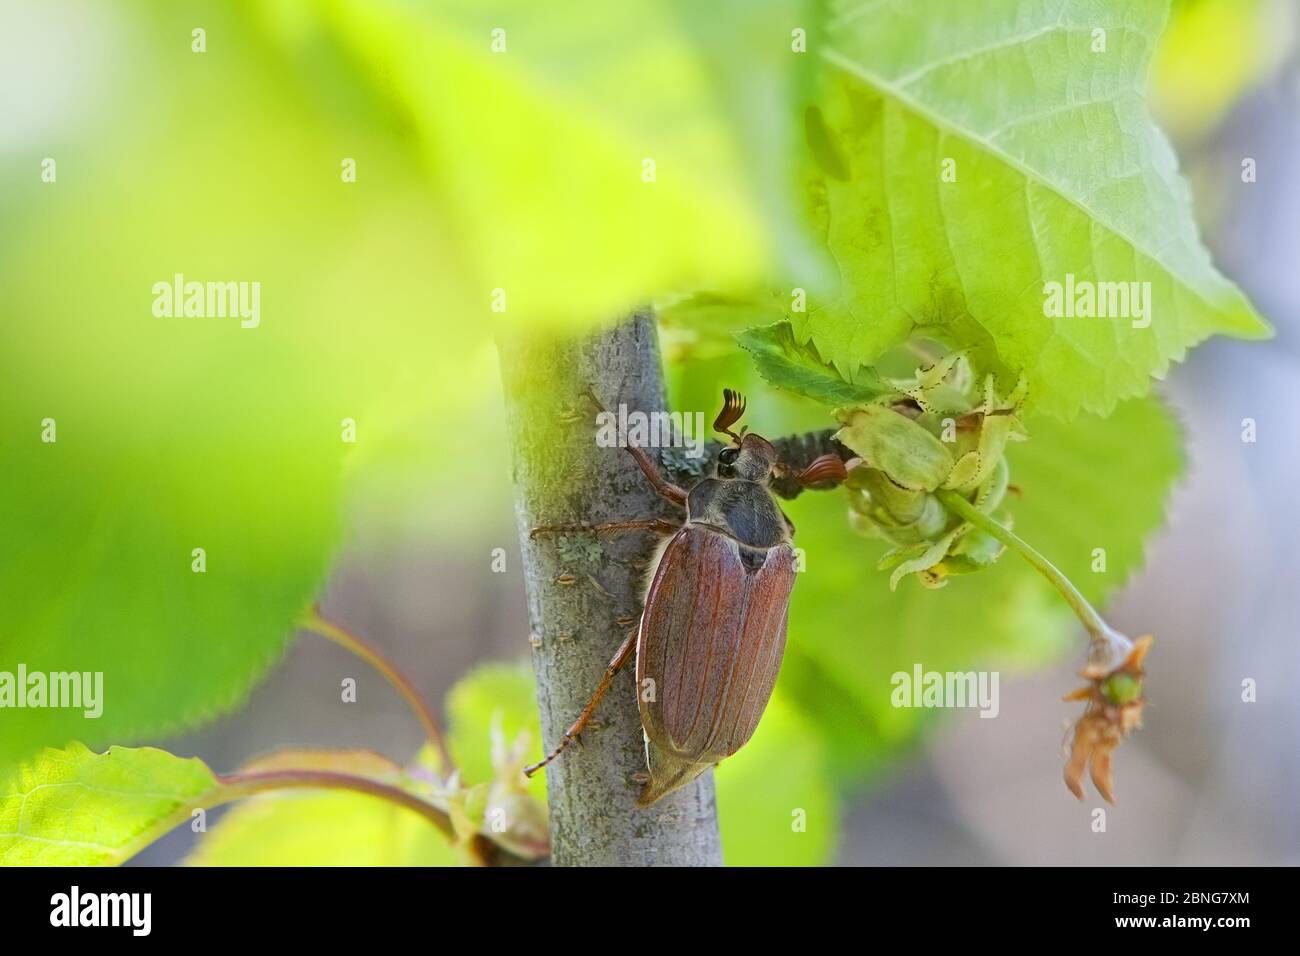 Close up of a chafer beetle on a leaf of a tree in warm colors with a blurred background Stock Photo